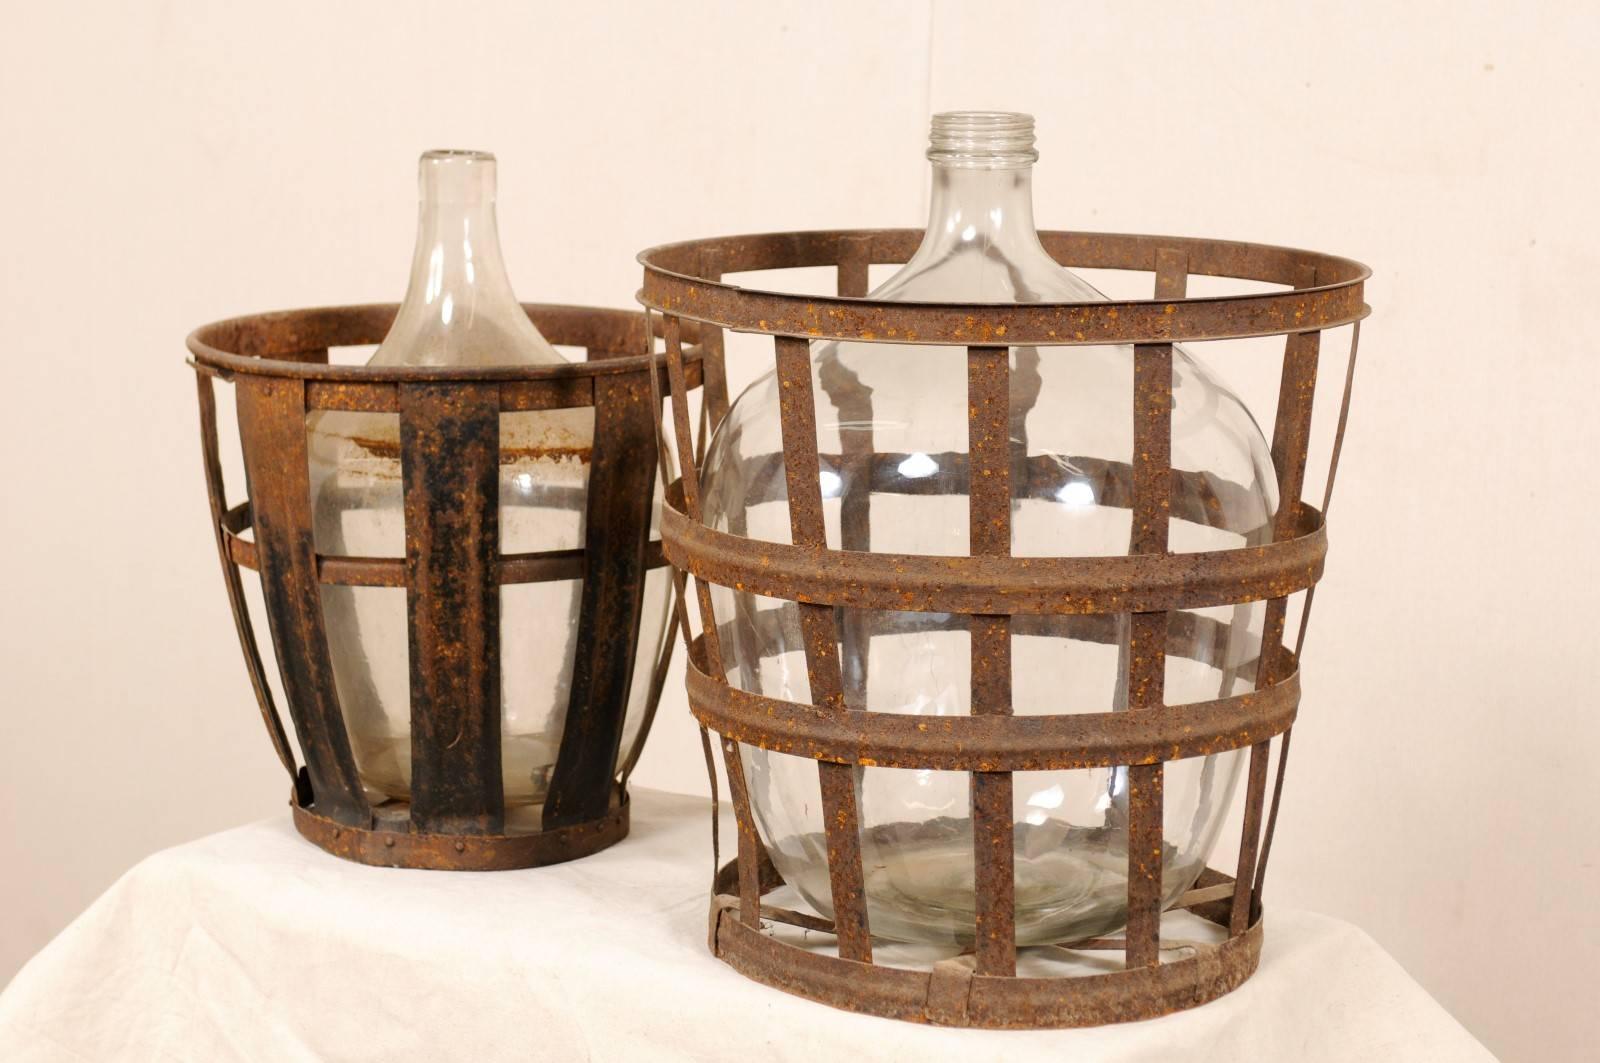 Rustic Pair of French Mid-20th Century Vintner Iron Baskets with Demijohn Wine Bottles